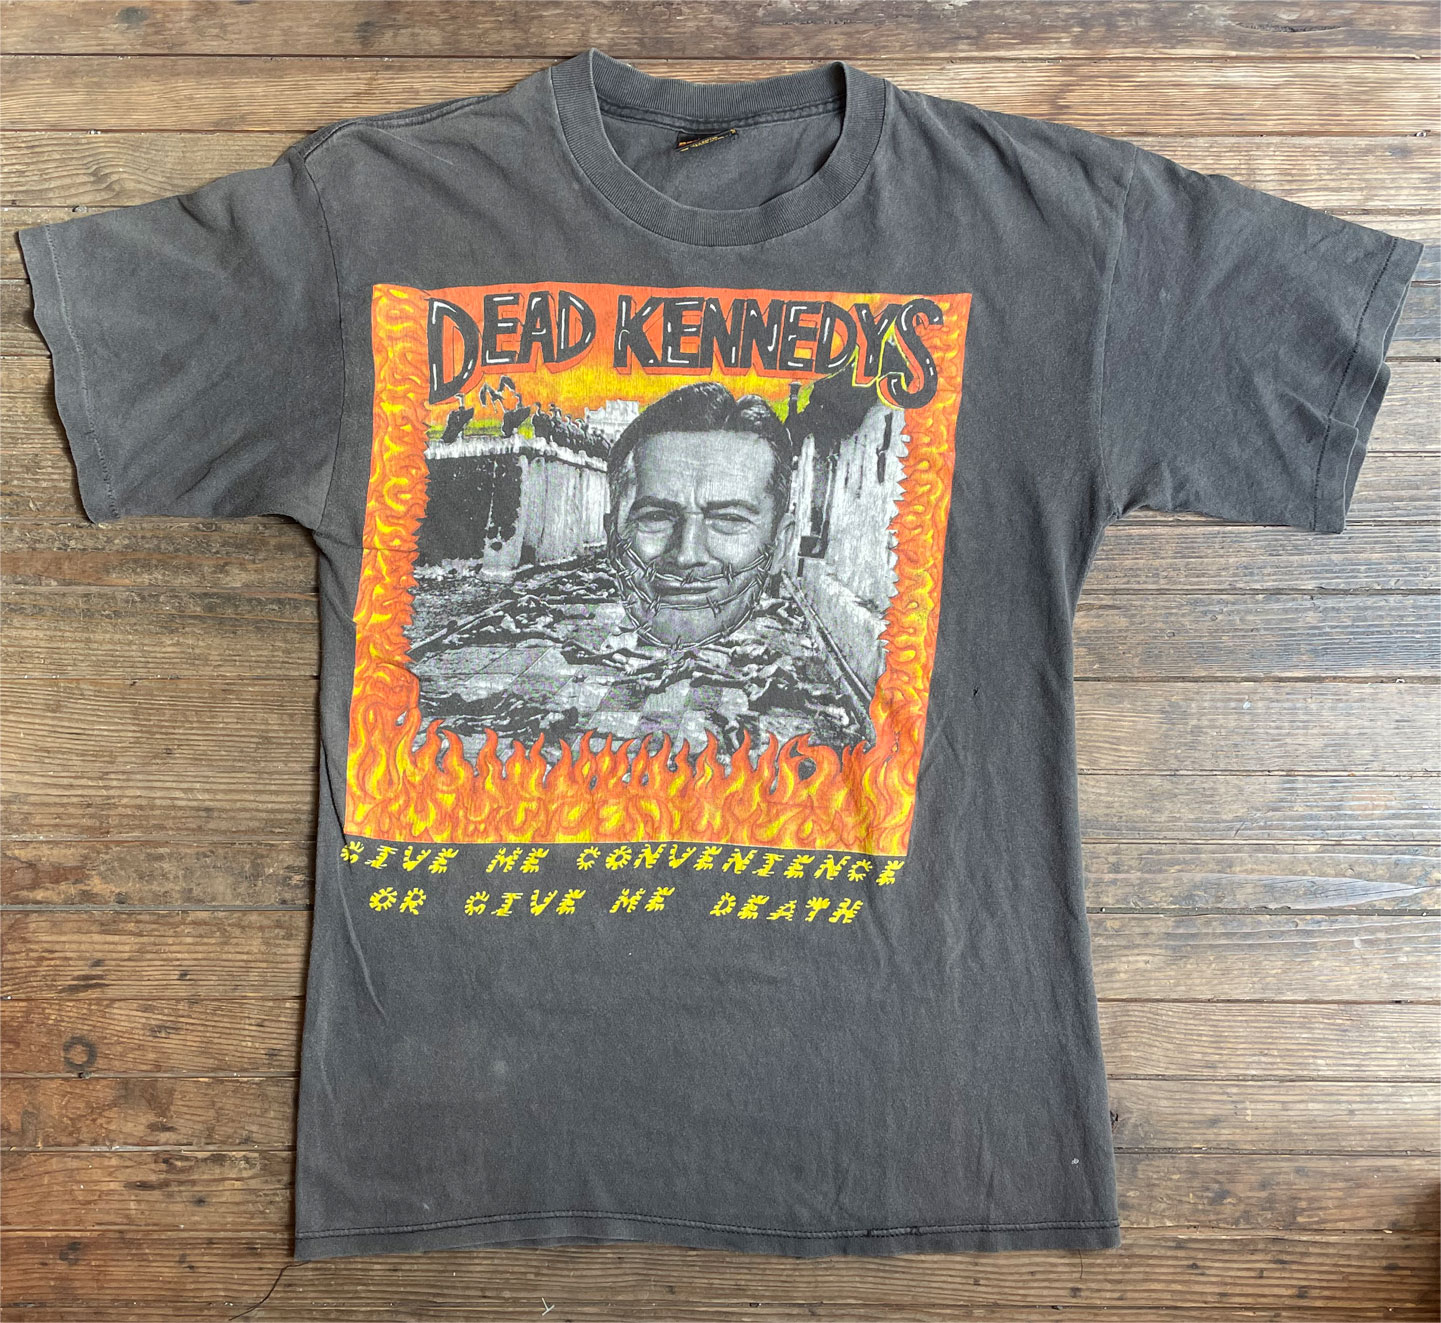 USED! DEAD KENNEDYS Tシャツ VINTAGE!